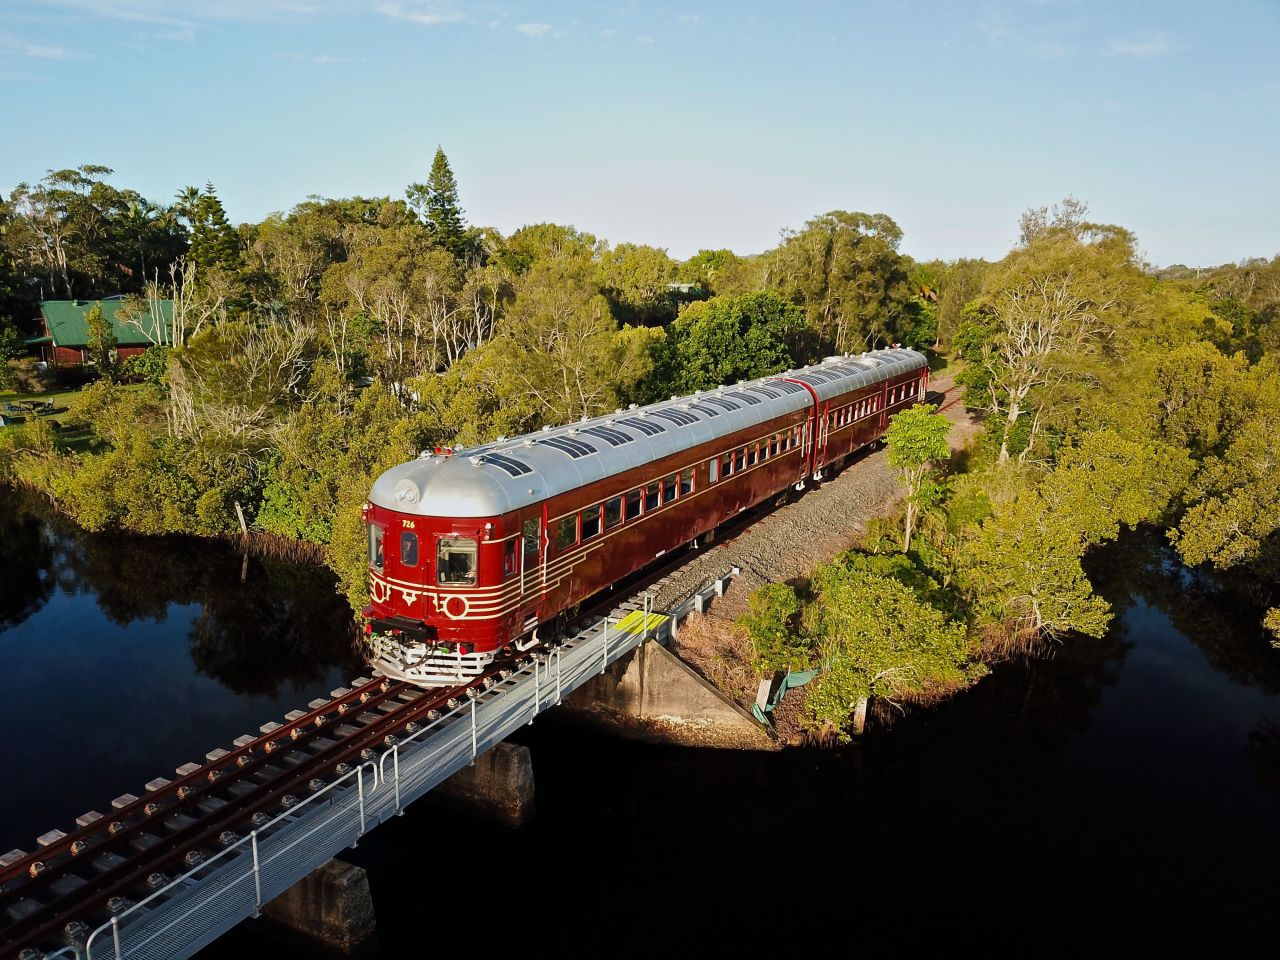 <strong>All aboard: </strong>The world's first solar-powered train has a surprisingly long history. This 1949 railcar was restored by the <a href="https://byronbaytrain.com.au/" target="_blank" target="_blank">Byron Bay Train</a> company in 2013 and fitted with rooftop solar panels two years later. It runs emission-free trips between the town center and a beach in Byron Bay, Australia.